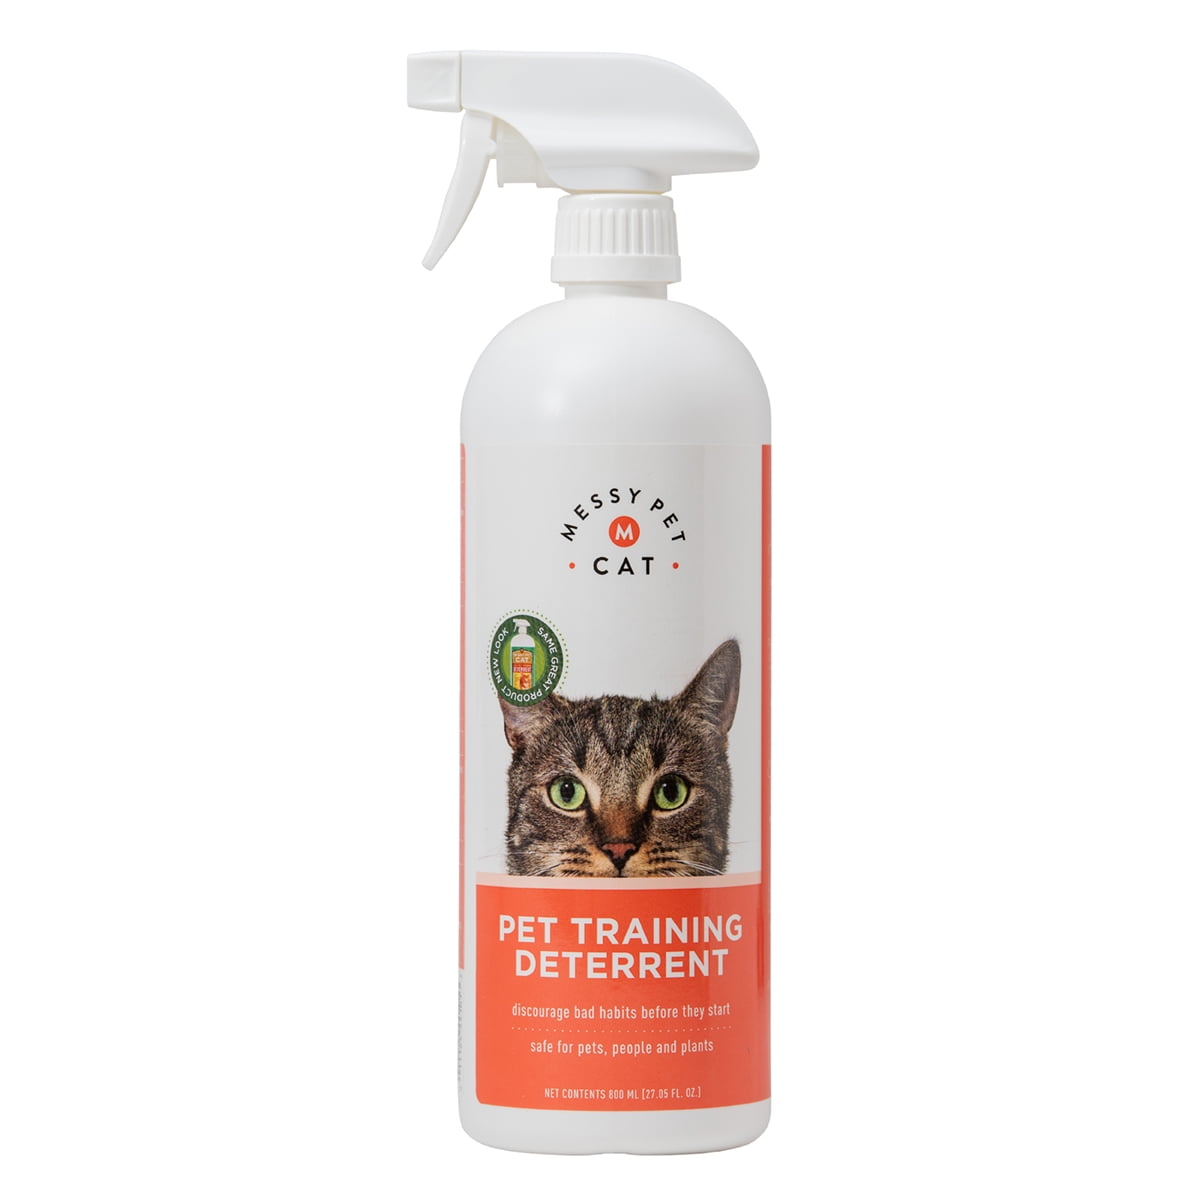 MESSY PET CAT Cat Training Spray to Help Train or Deter, 27 oz